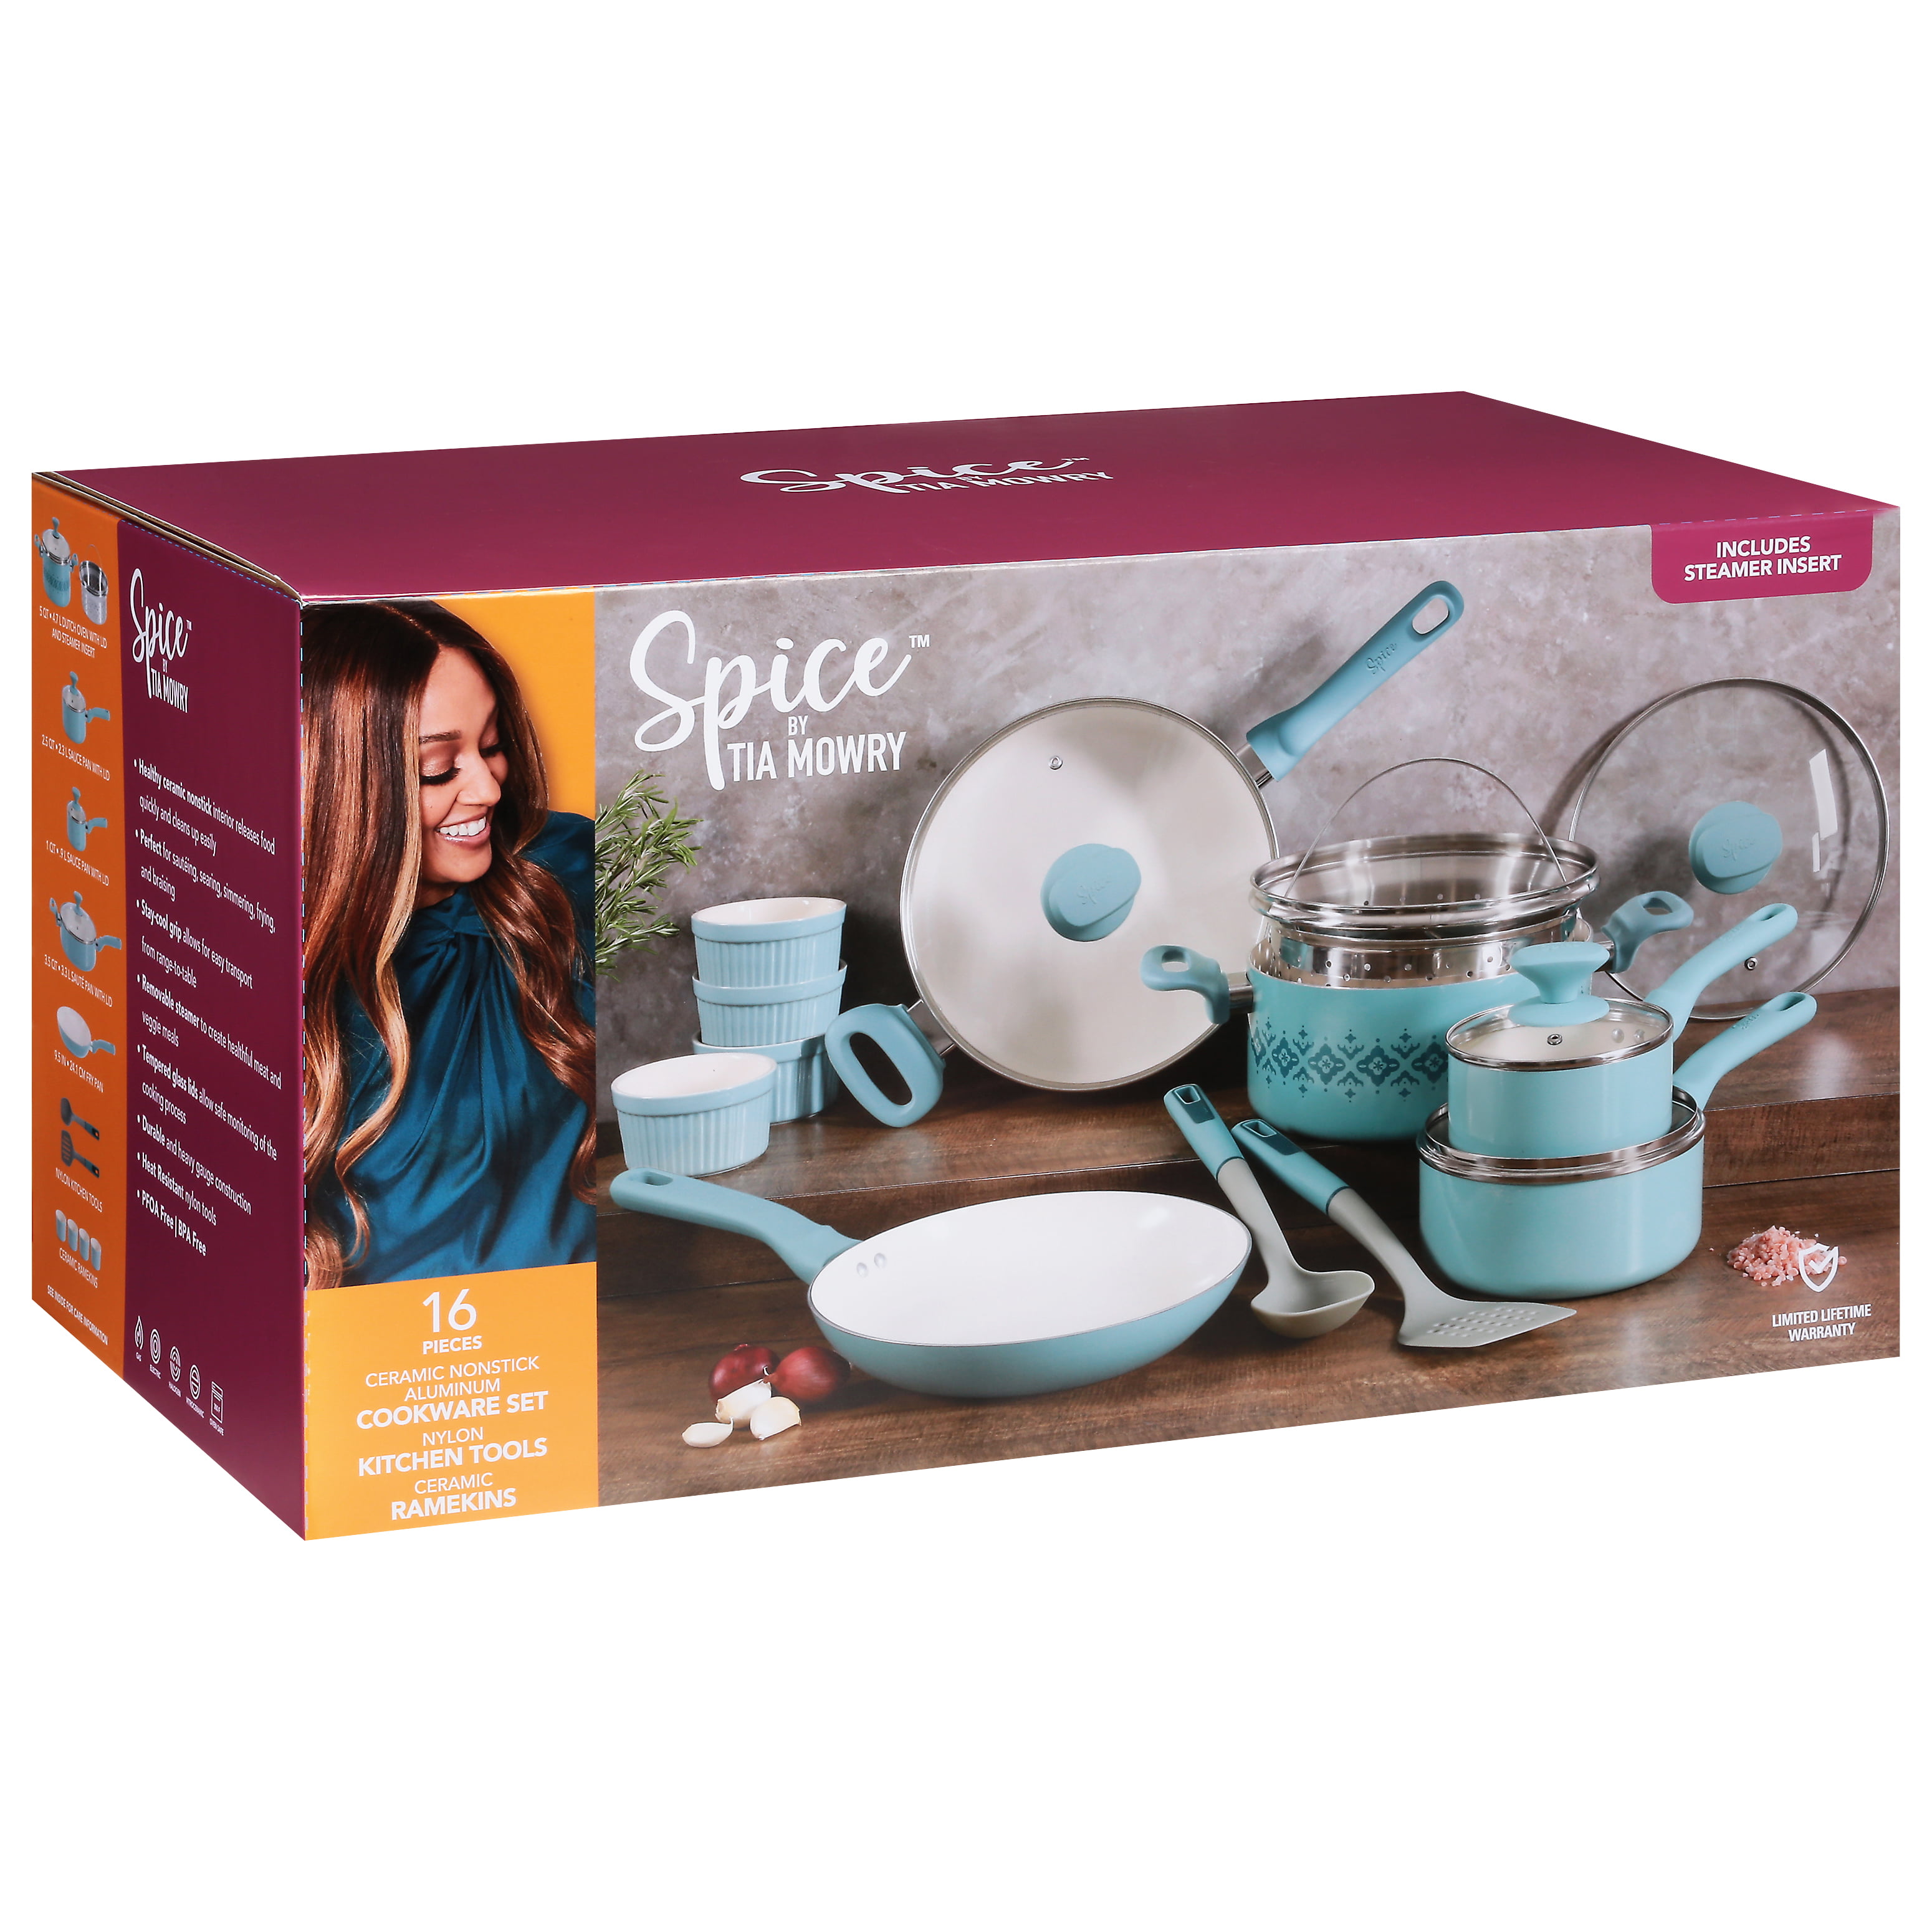  Spice by Tia Mowry Savory Saffron 7-Piece Healthy Nonstick  Ceramic Cookware Set - Teal: Home & Kitchen